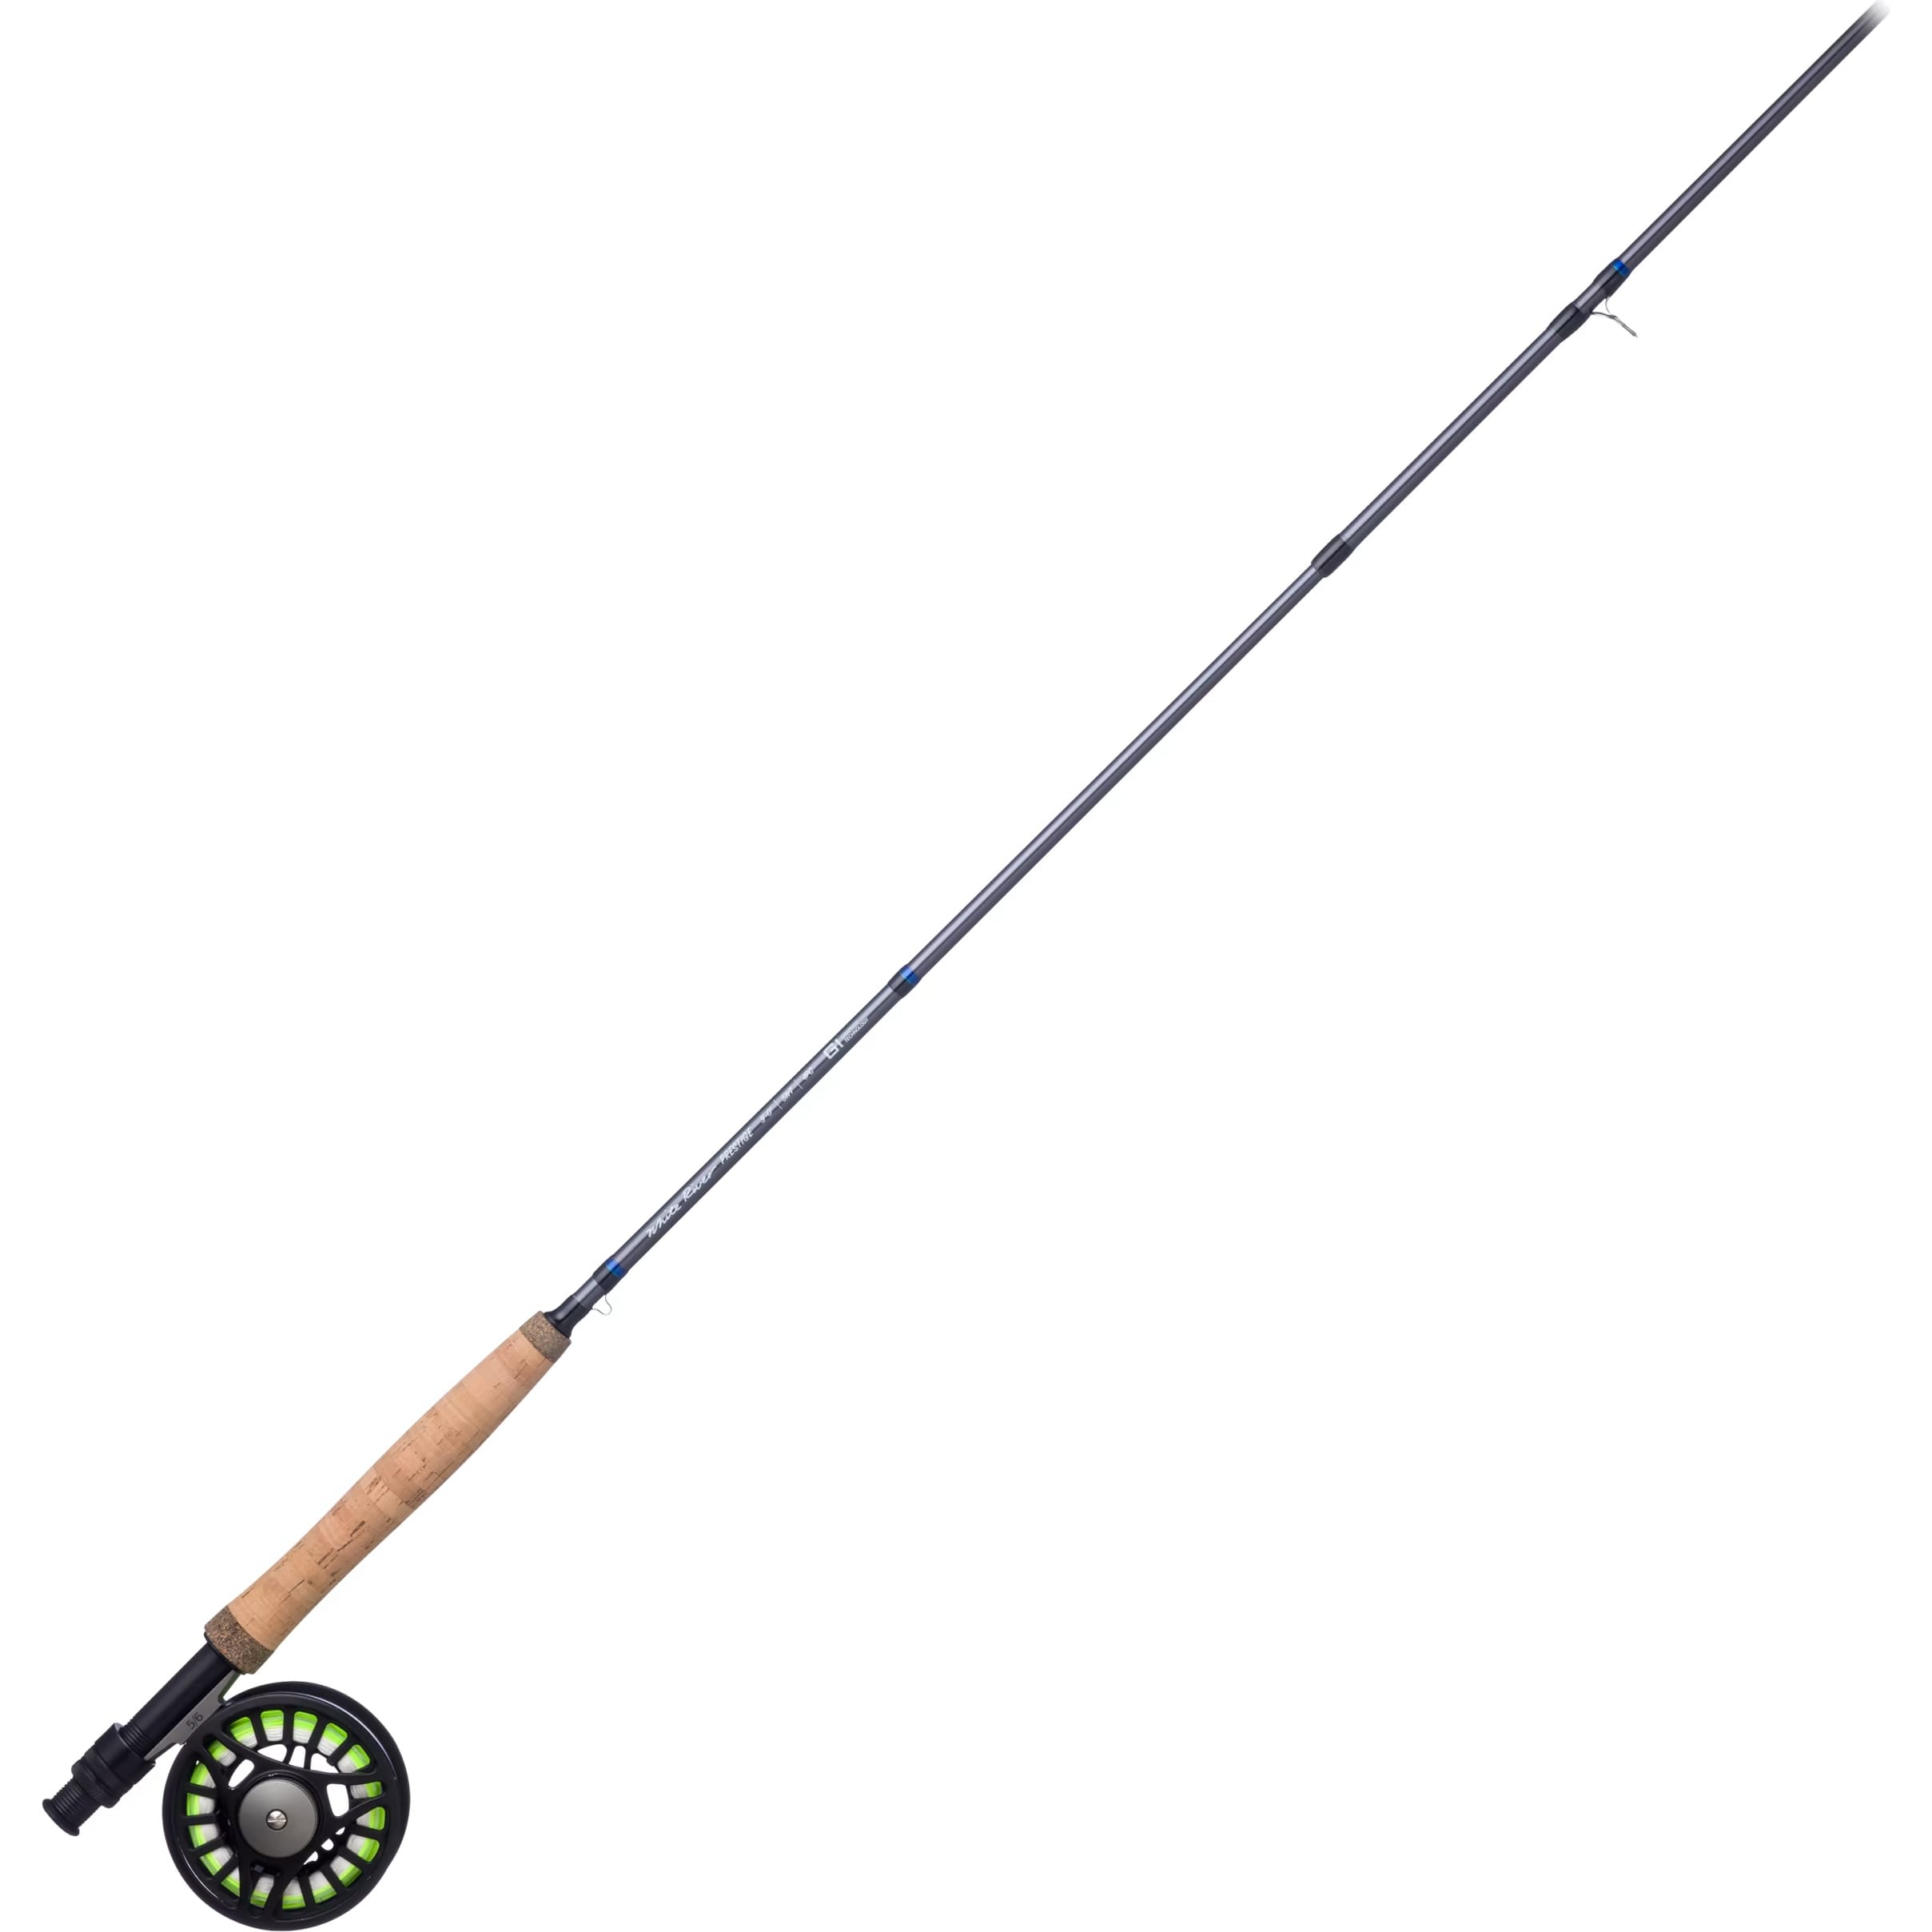 A Shakespeare Flymaster graphite 275cm fly fishing rod, a Shakespeare  Aerial carbon fibre 300cm fly